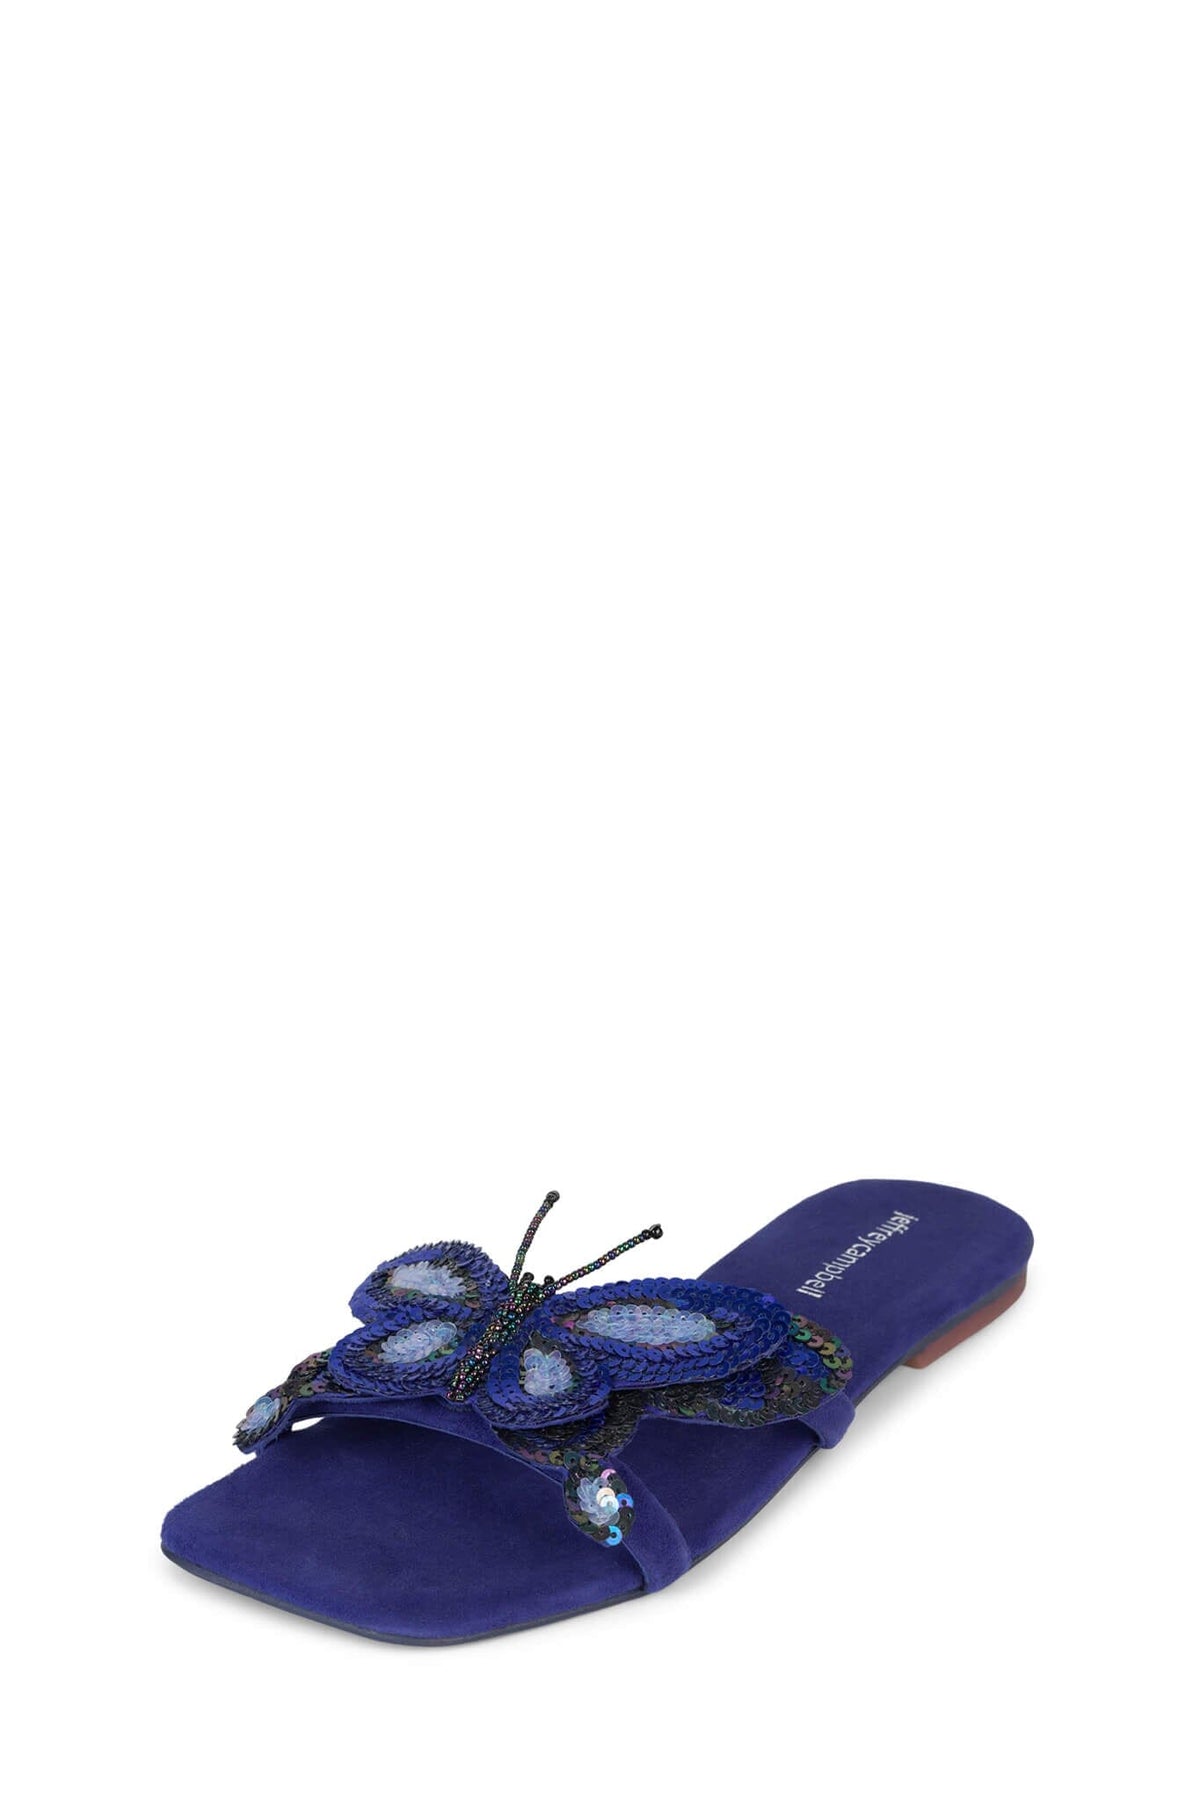 CLOUDYWING Jeffrey Campbell Flat Sandals Blue Suede Combo